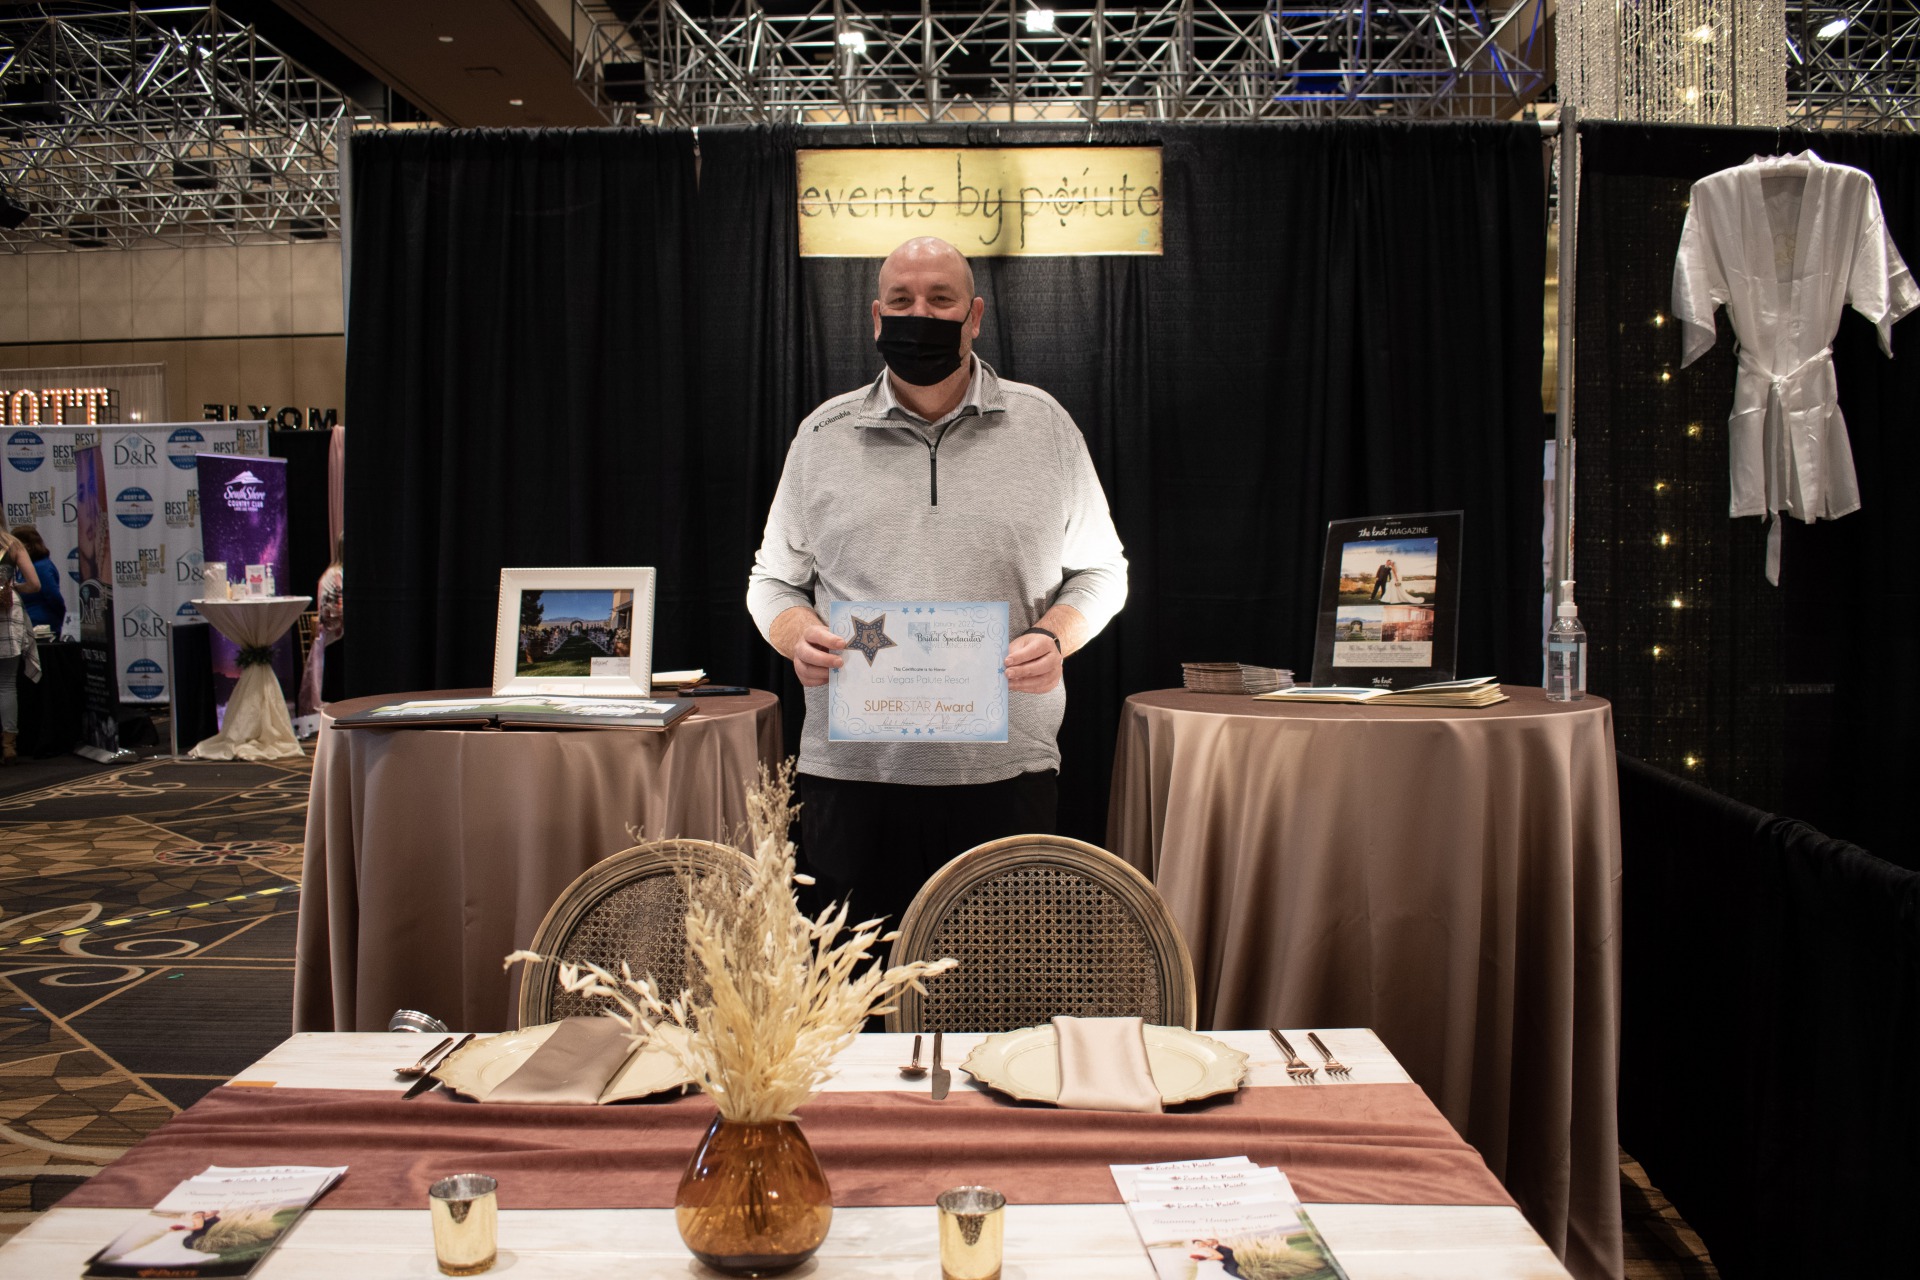 Events by Paiute, Las Vegas Wedding Professionals receive star award at January Bridal Spectacular